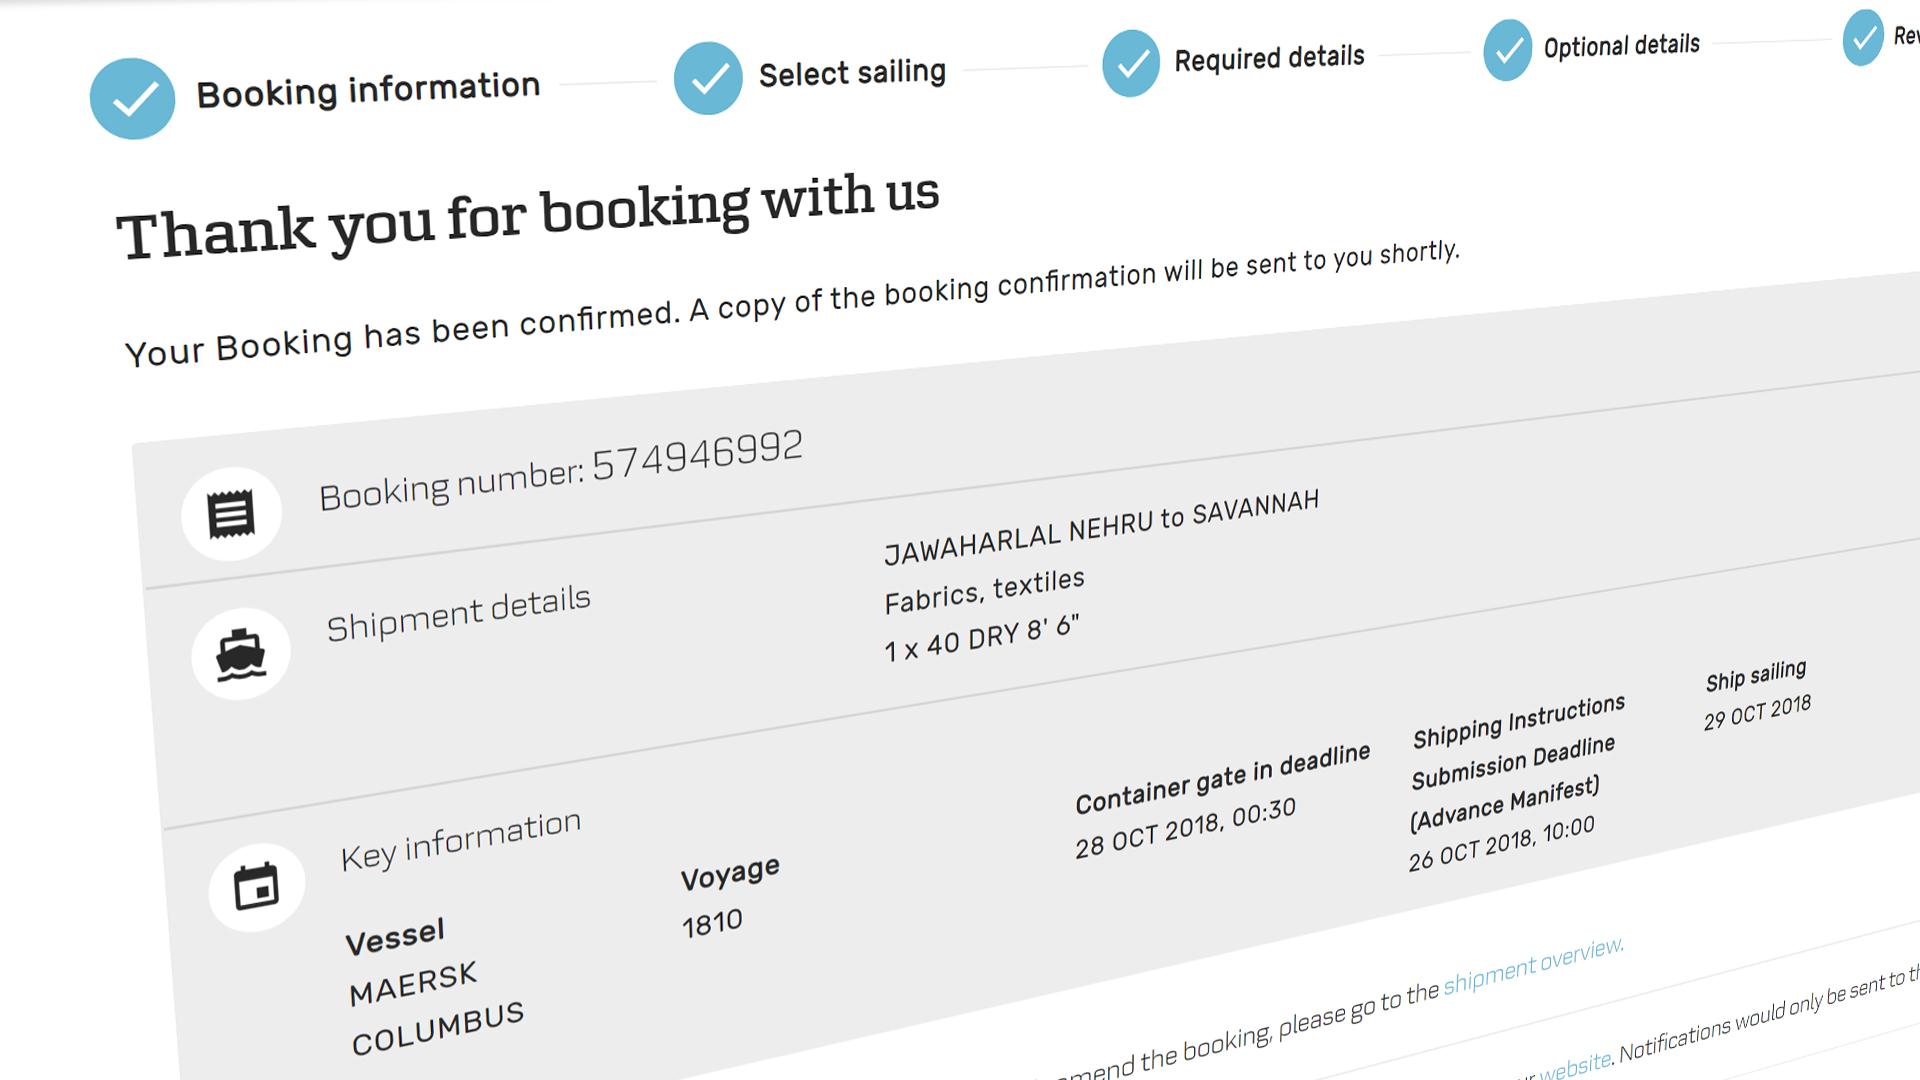 Self Photos / Files - Maersk instant booking